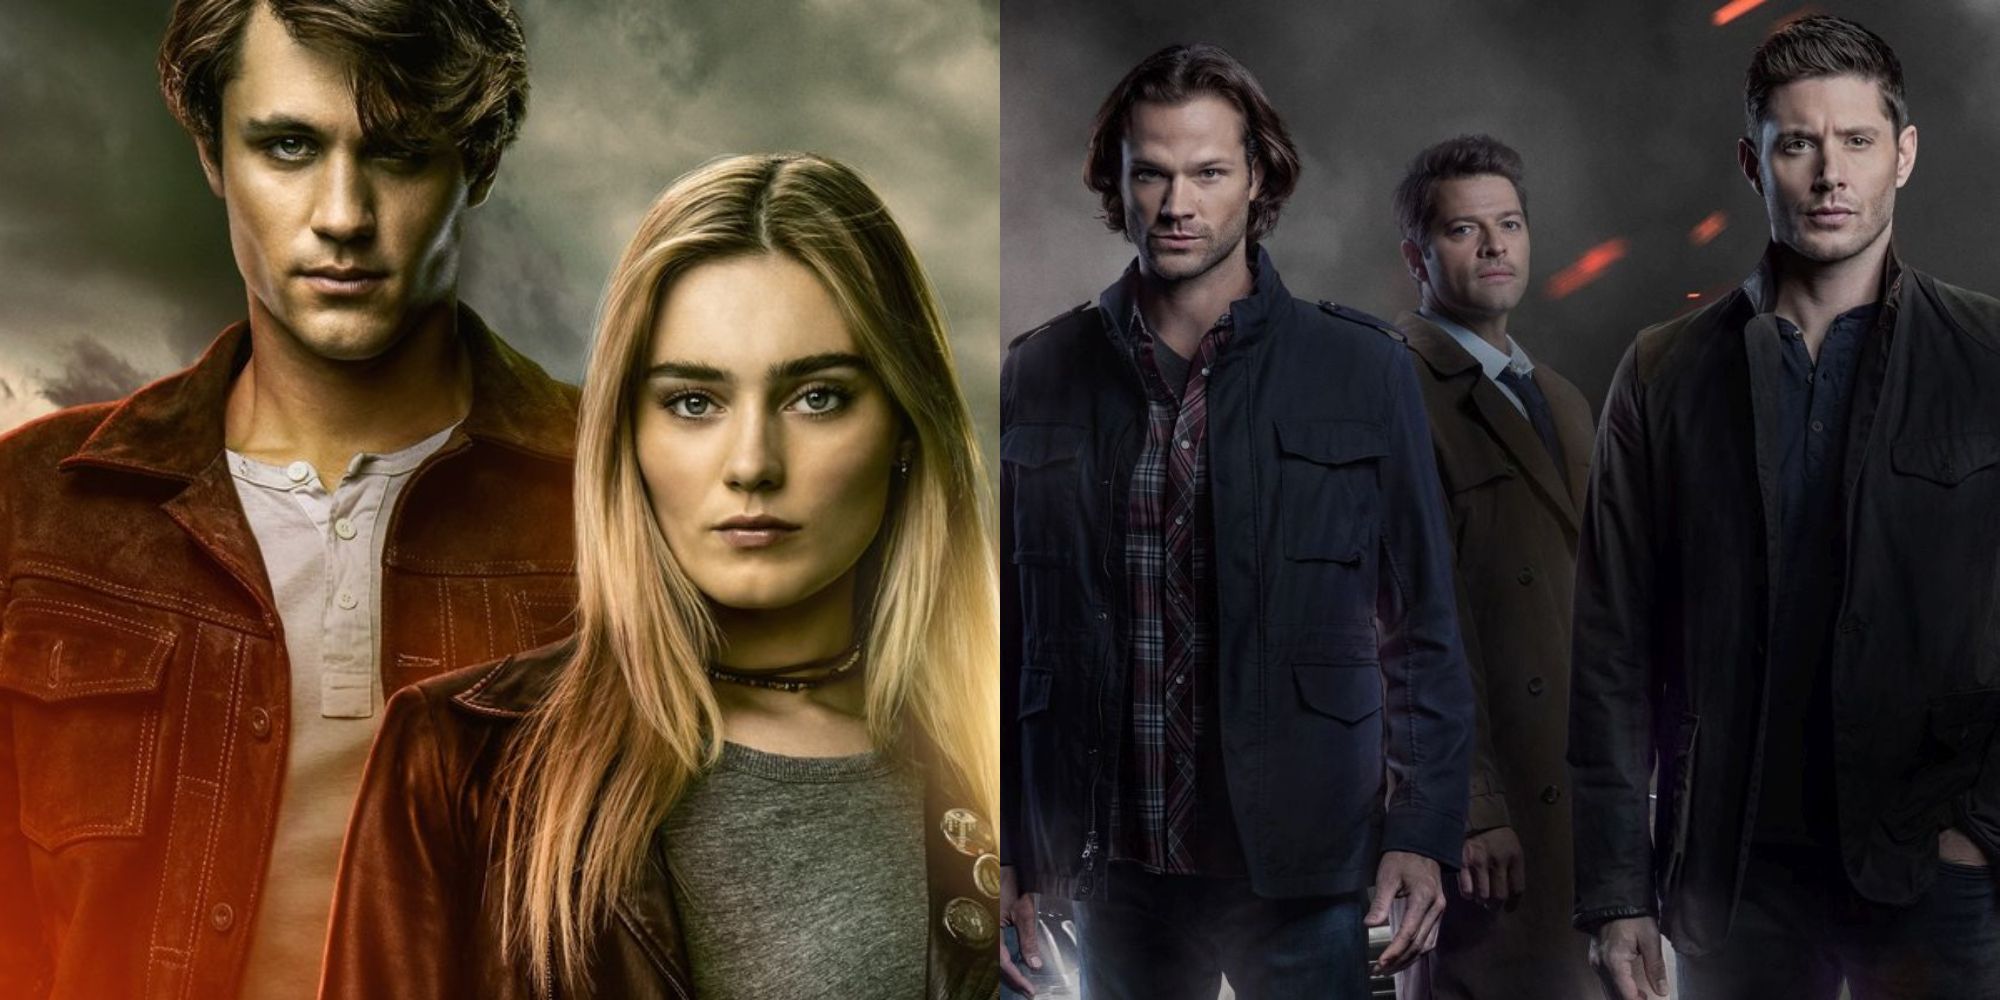 Side by side promo images for The Winchesters and Supernatural